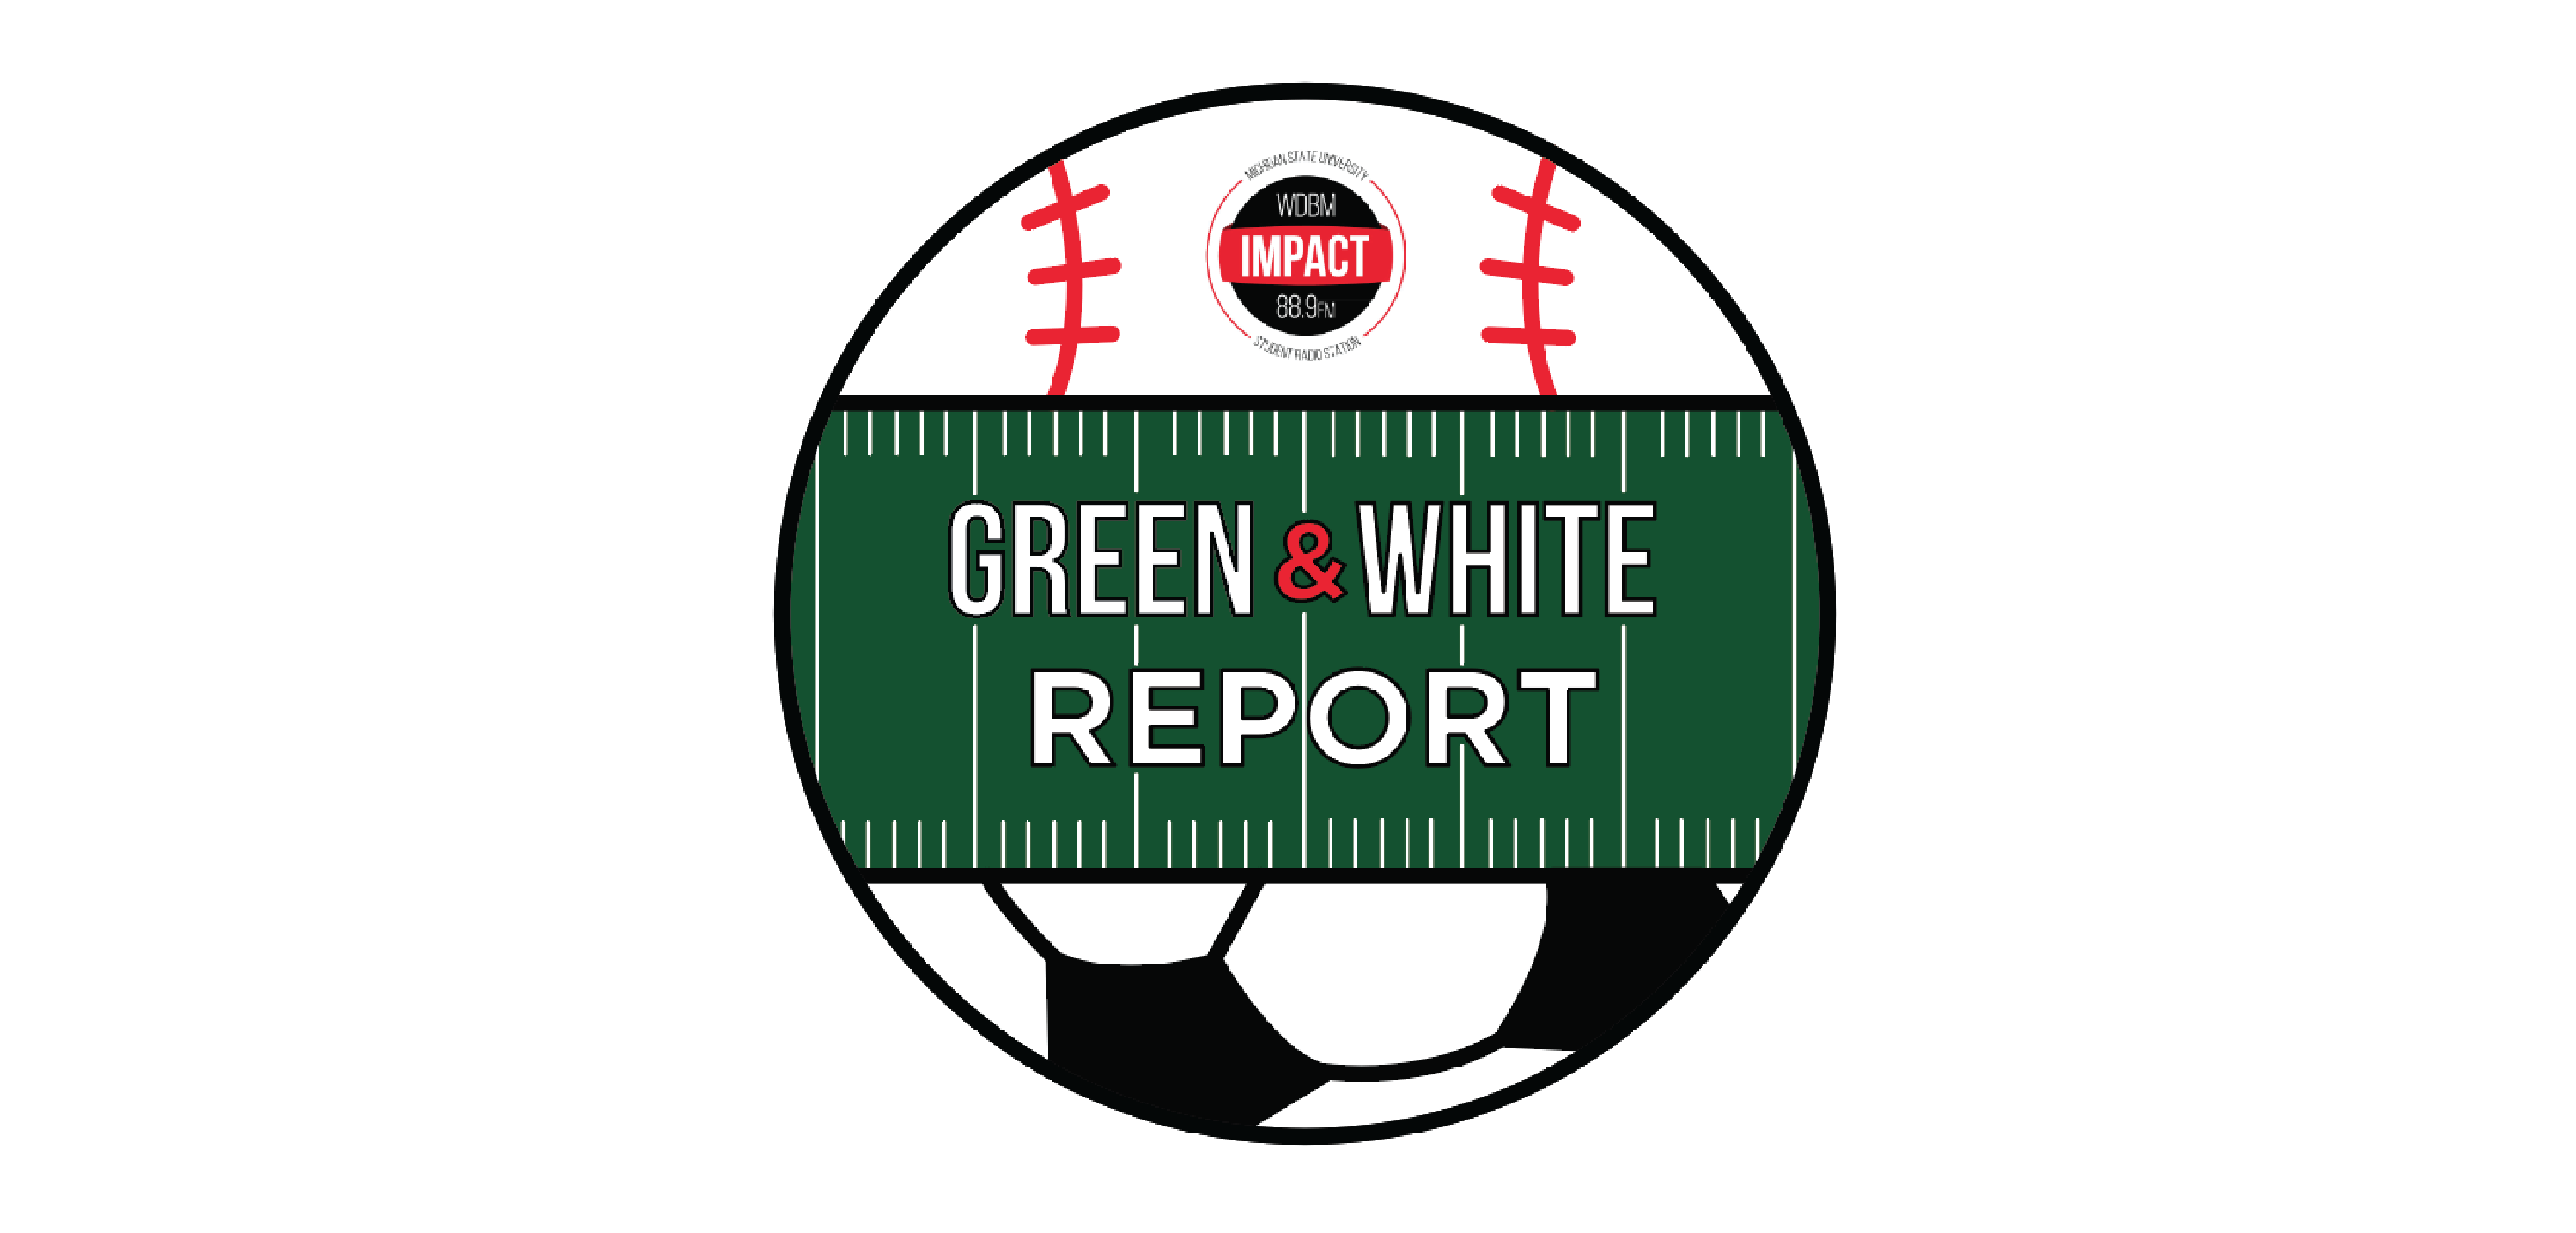 Green & White Report - 8/25/19 - We. Are. Back!